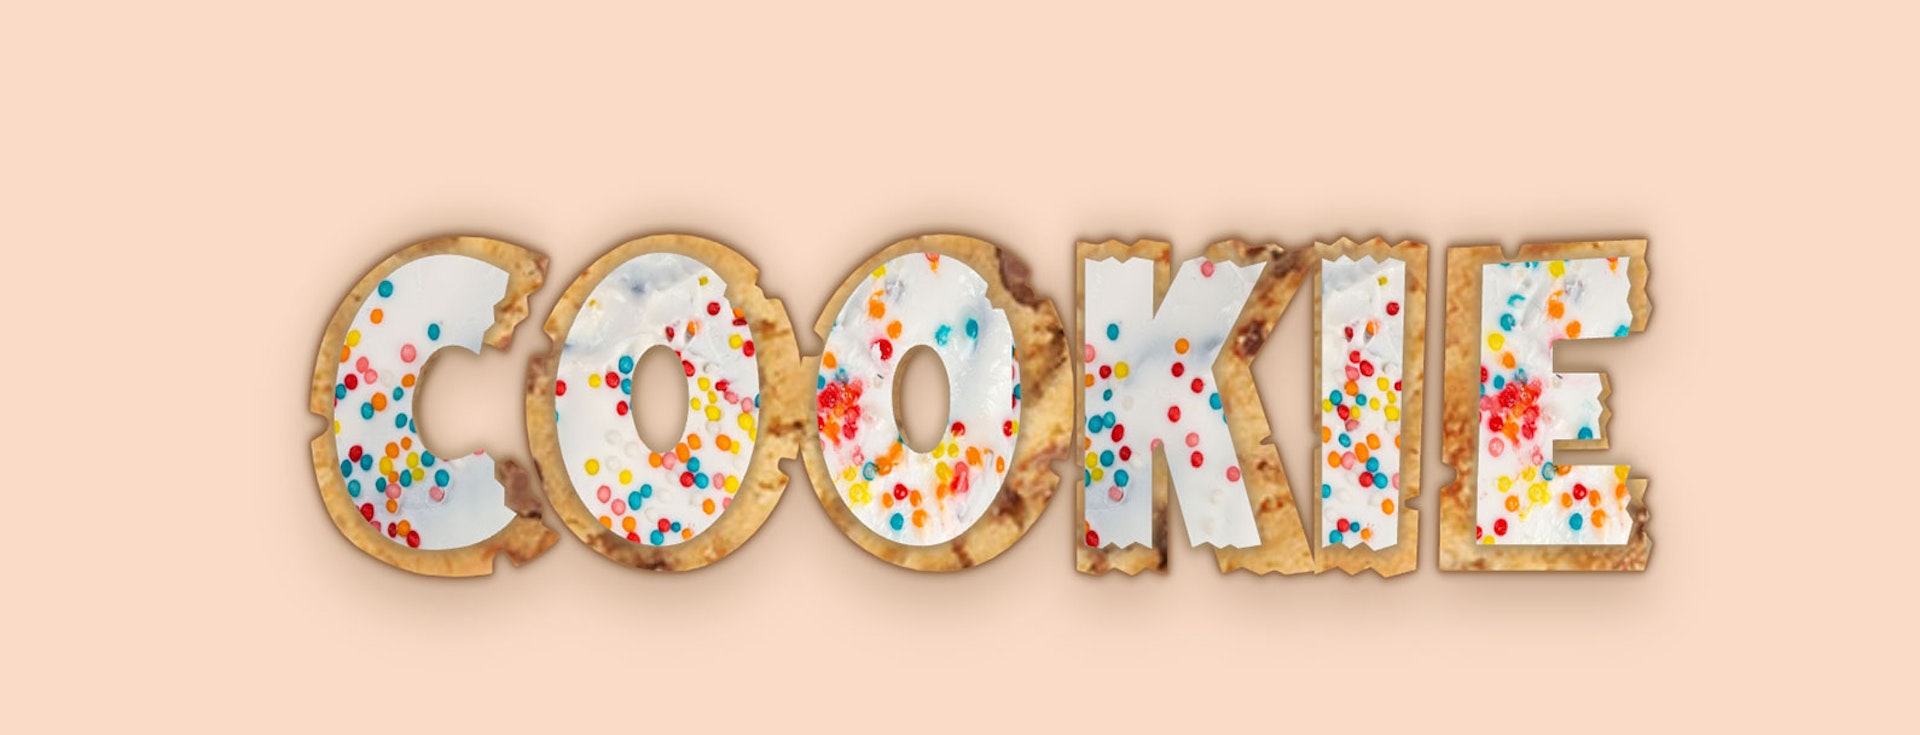 Cookie text effect with cookie base and sprinkles on top